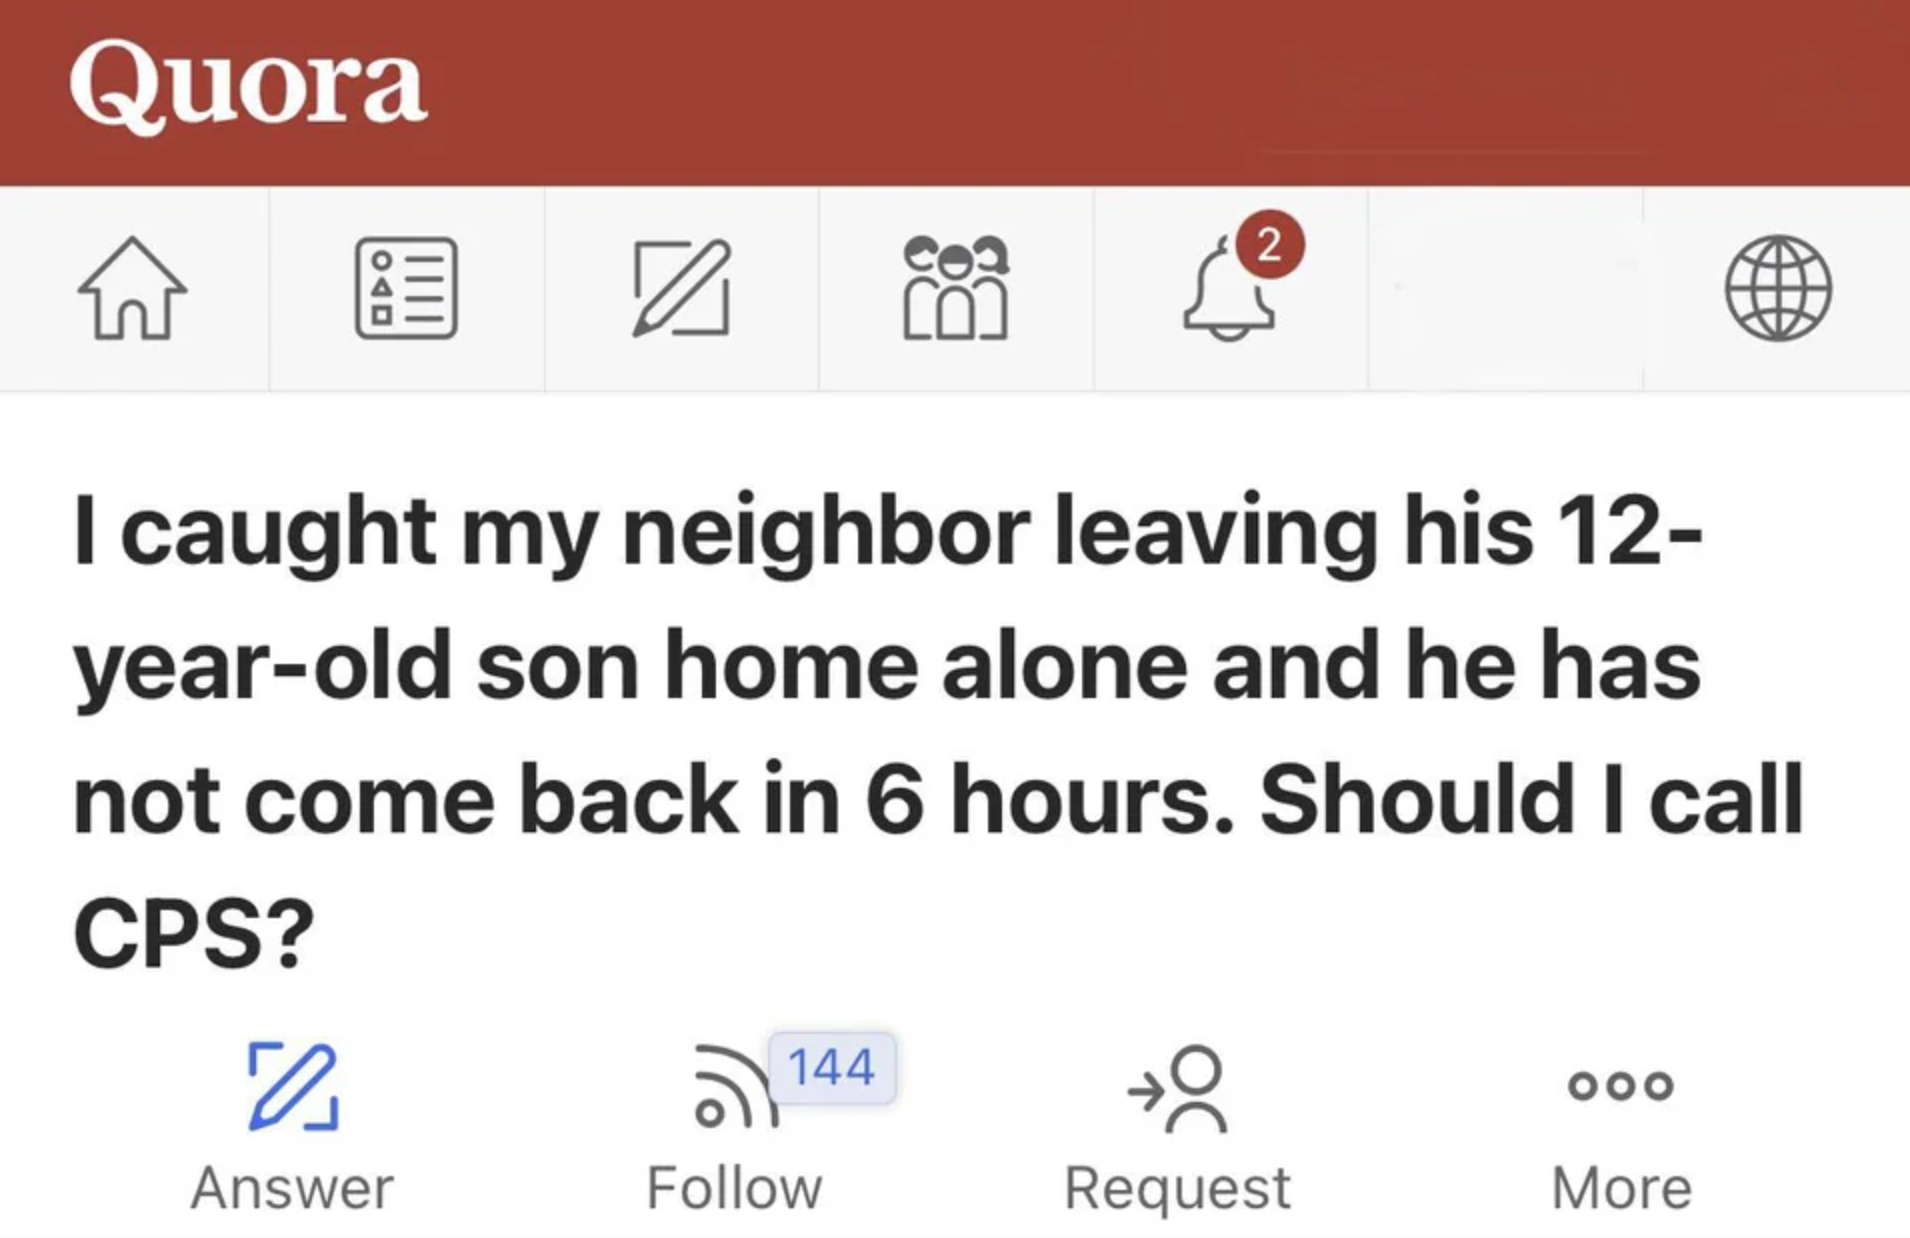 &quot;I caught my neighbor leaving his 12-year-old son home alone and he has not come back in 6 hours.&quot;